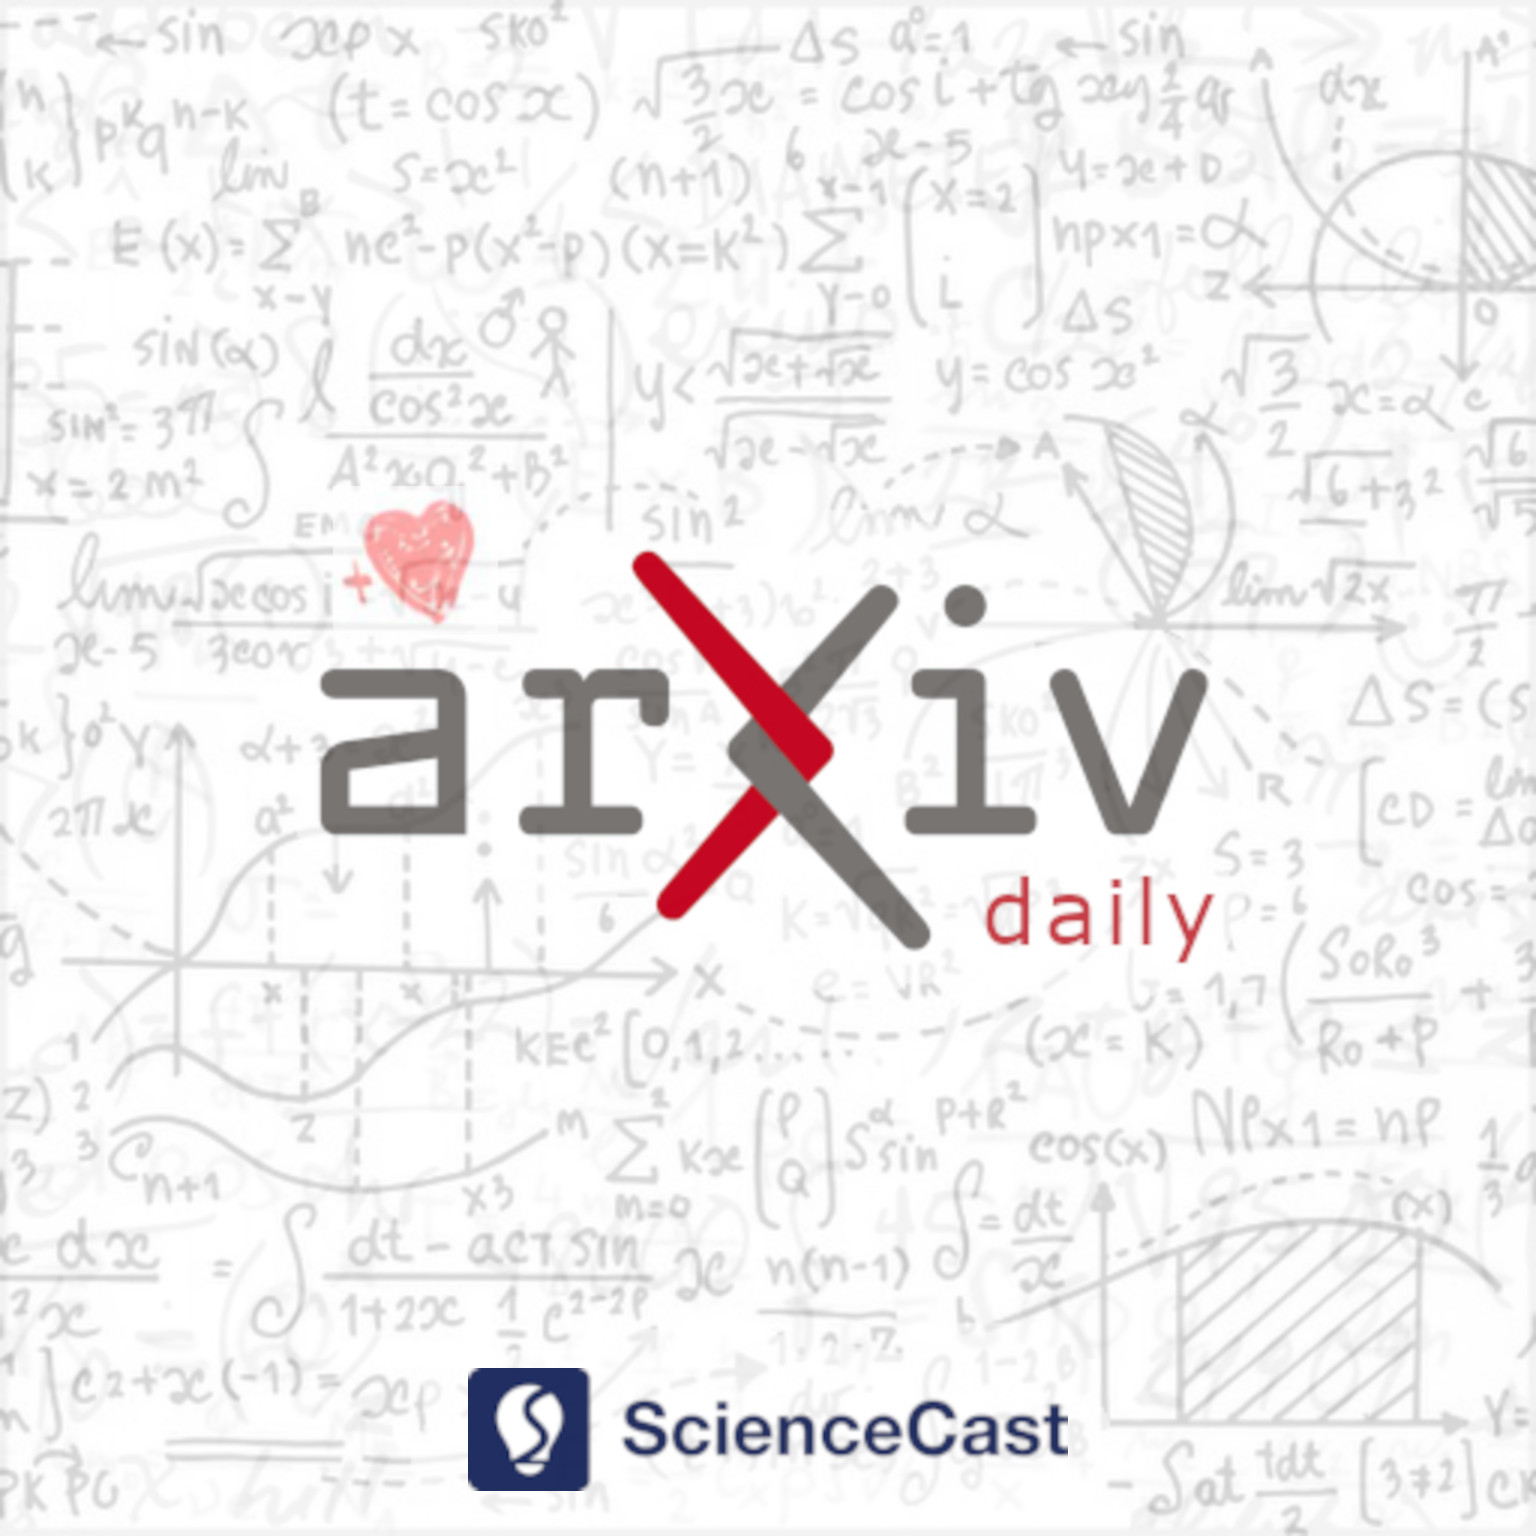 arXiv daily: Analysis of PDEs